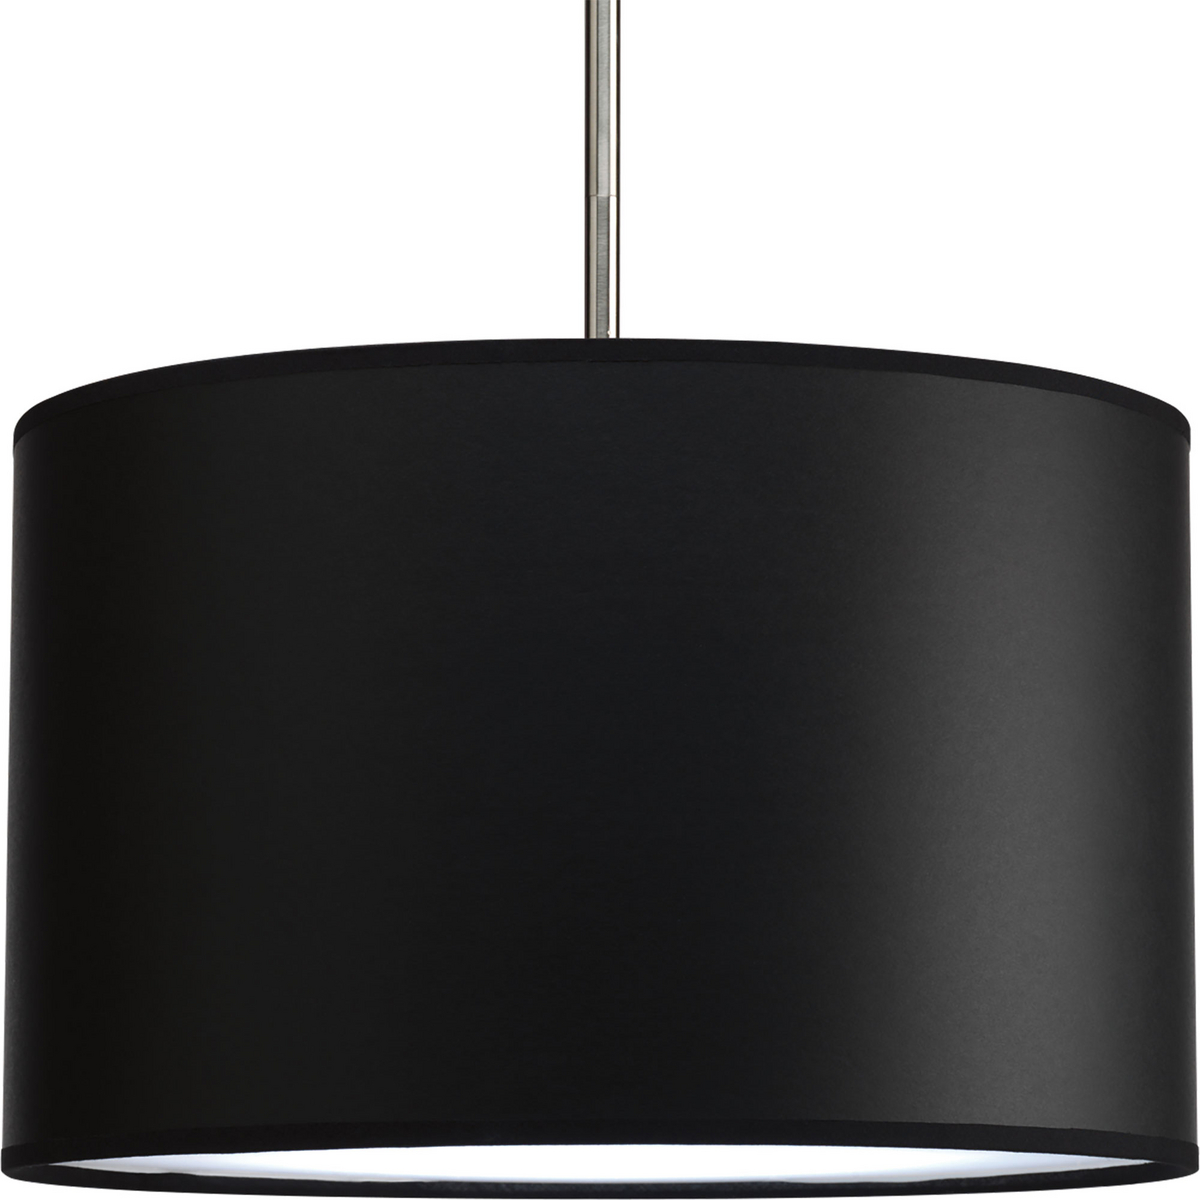 The Markor Series is a modular pendant system. The versatile series allow the choice of shades and stem kits. This 16 in shade with Black Parchment Paper is inspired by mid-century design. Acrylic bottom diffuser. This shade can be used with a variety of stem kits from 1 to 3 light in CFL, LED and incandescent light sources.